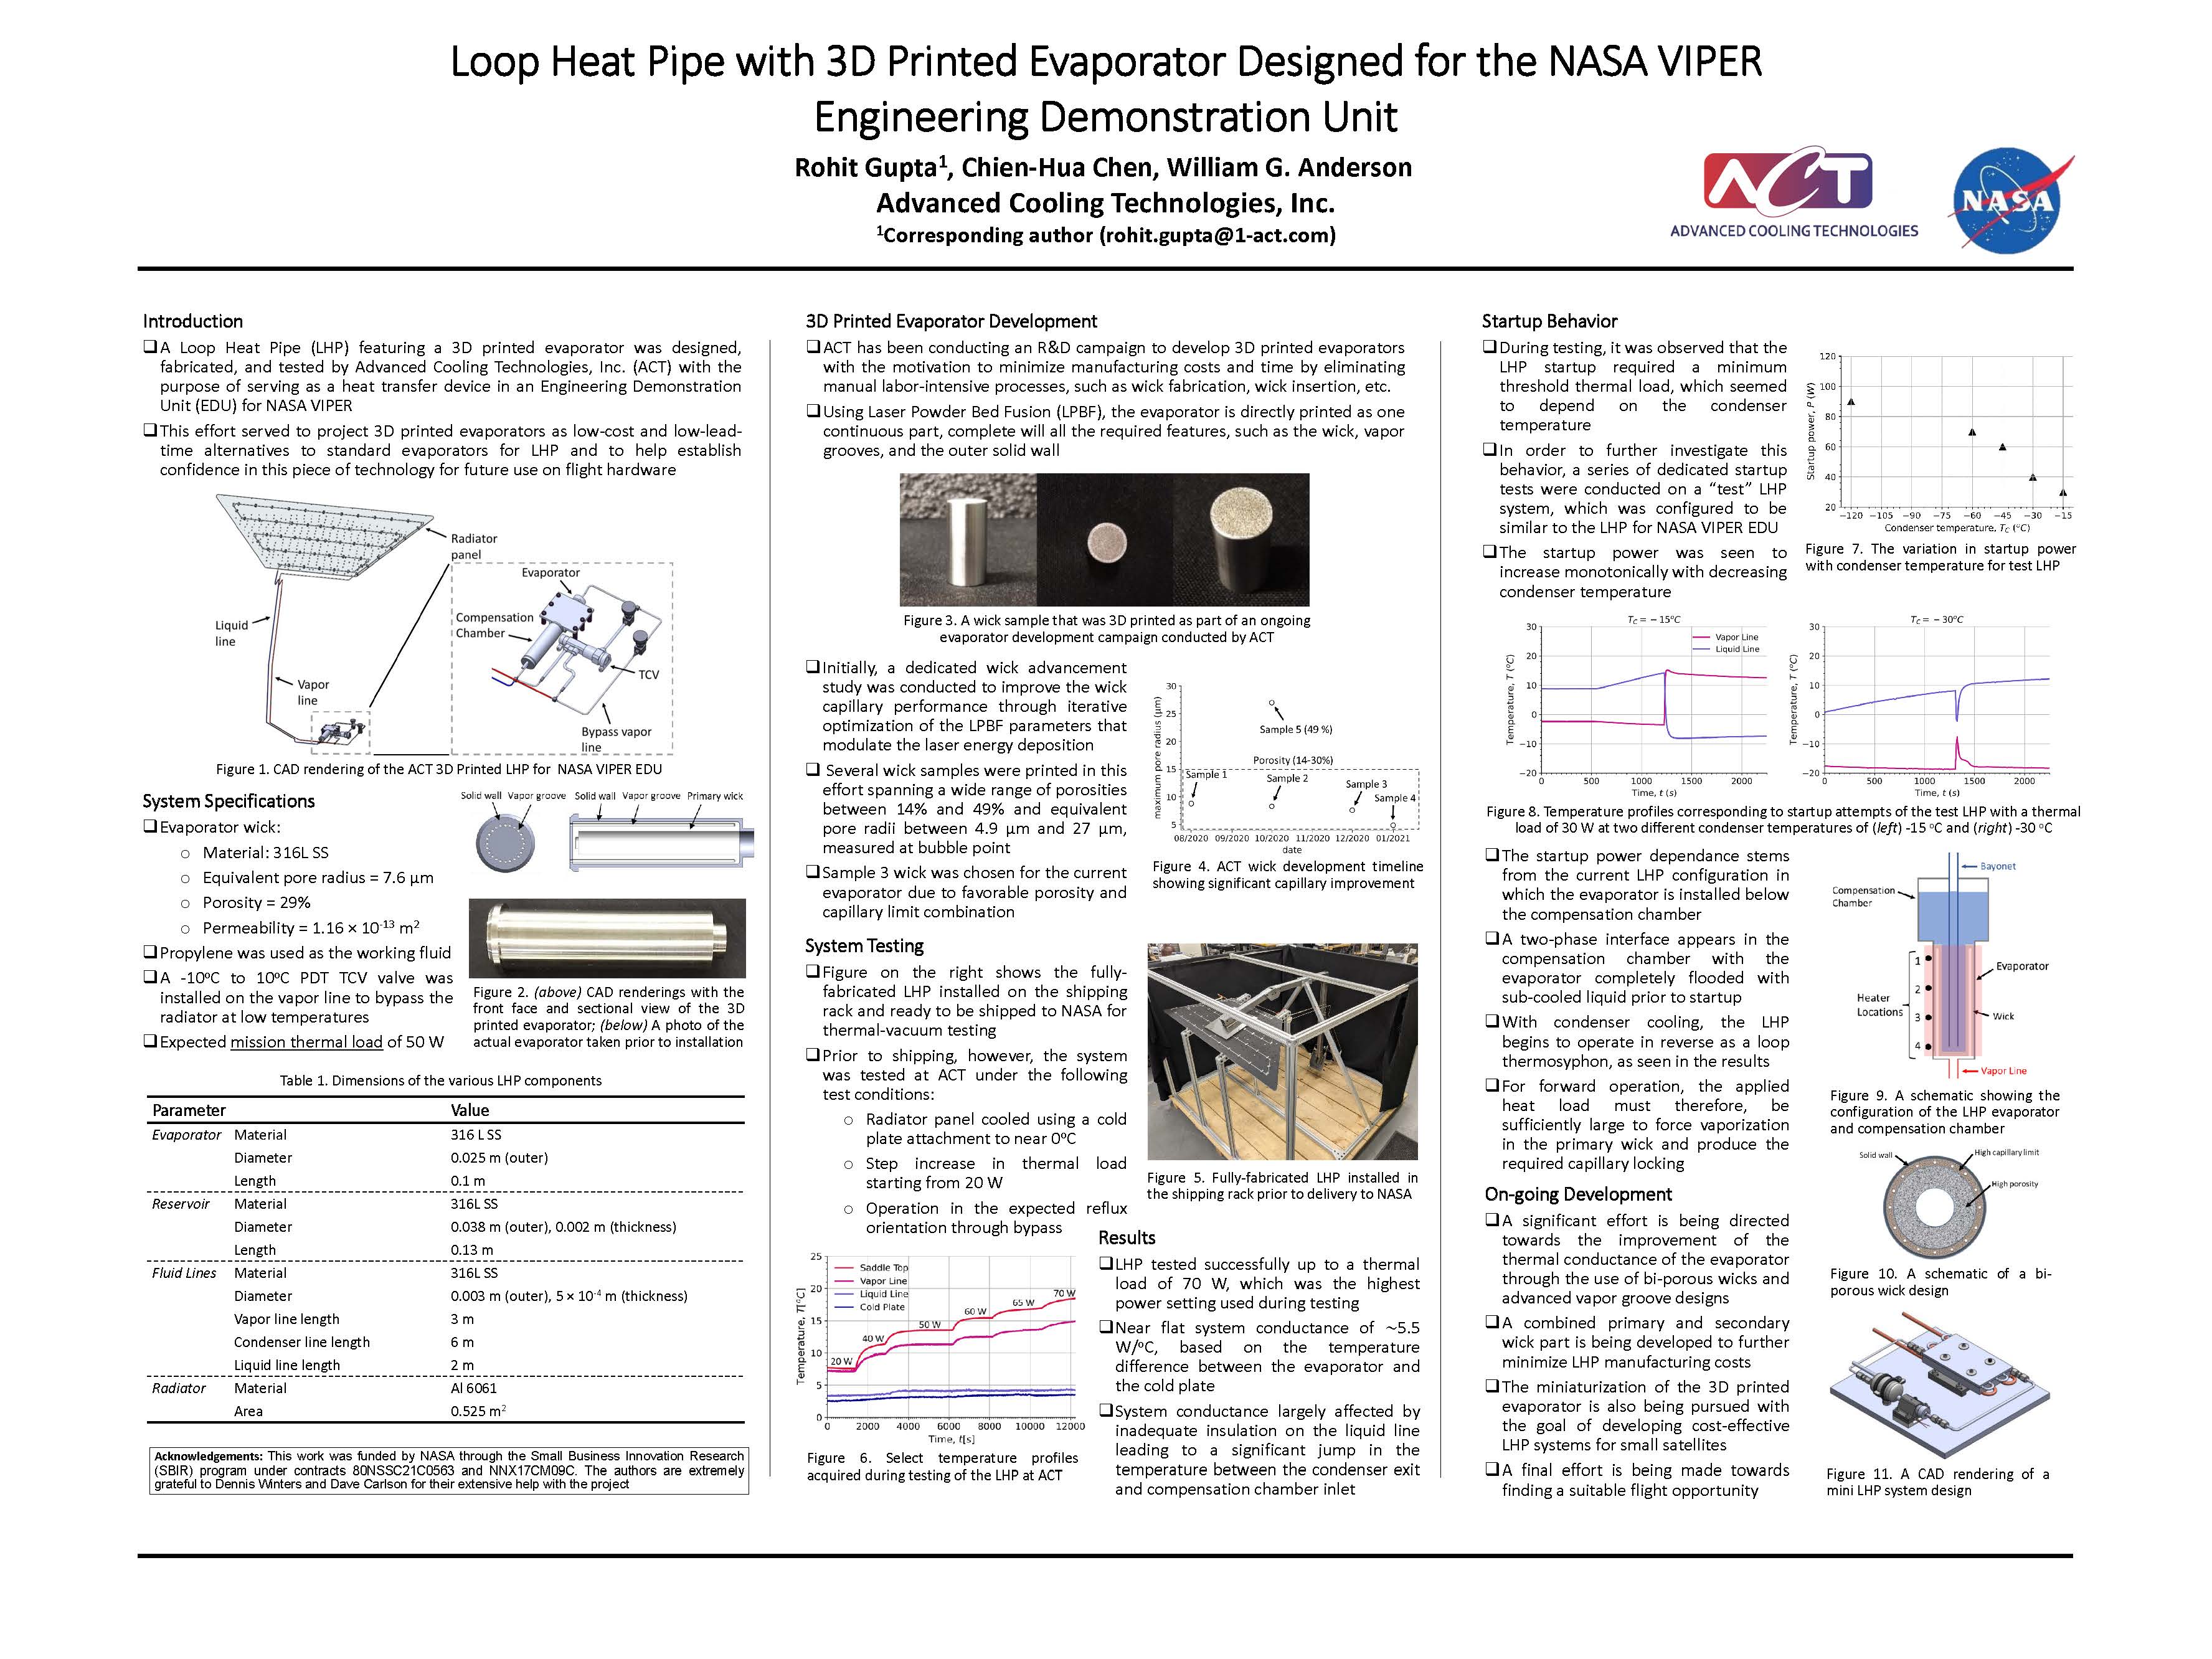 Loop Heat Pipe With 3D Printed Evaporator Designed for the NASA VIPER Engineering Demonstration Unit